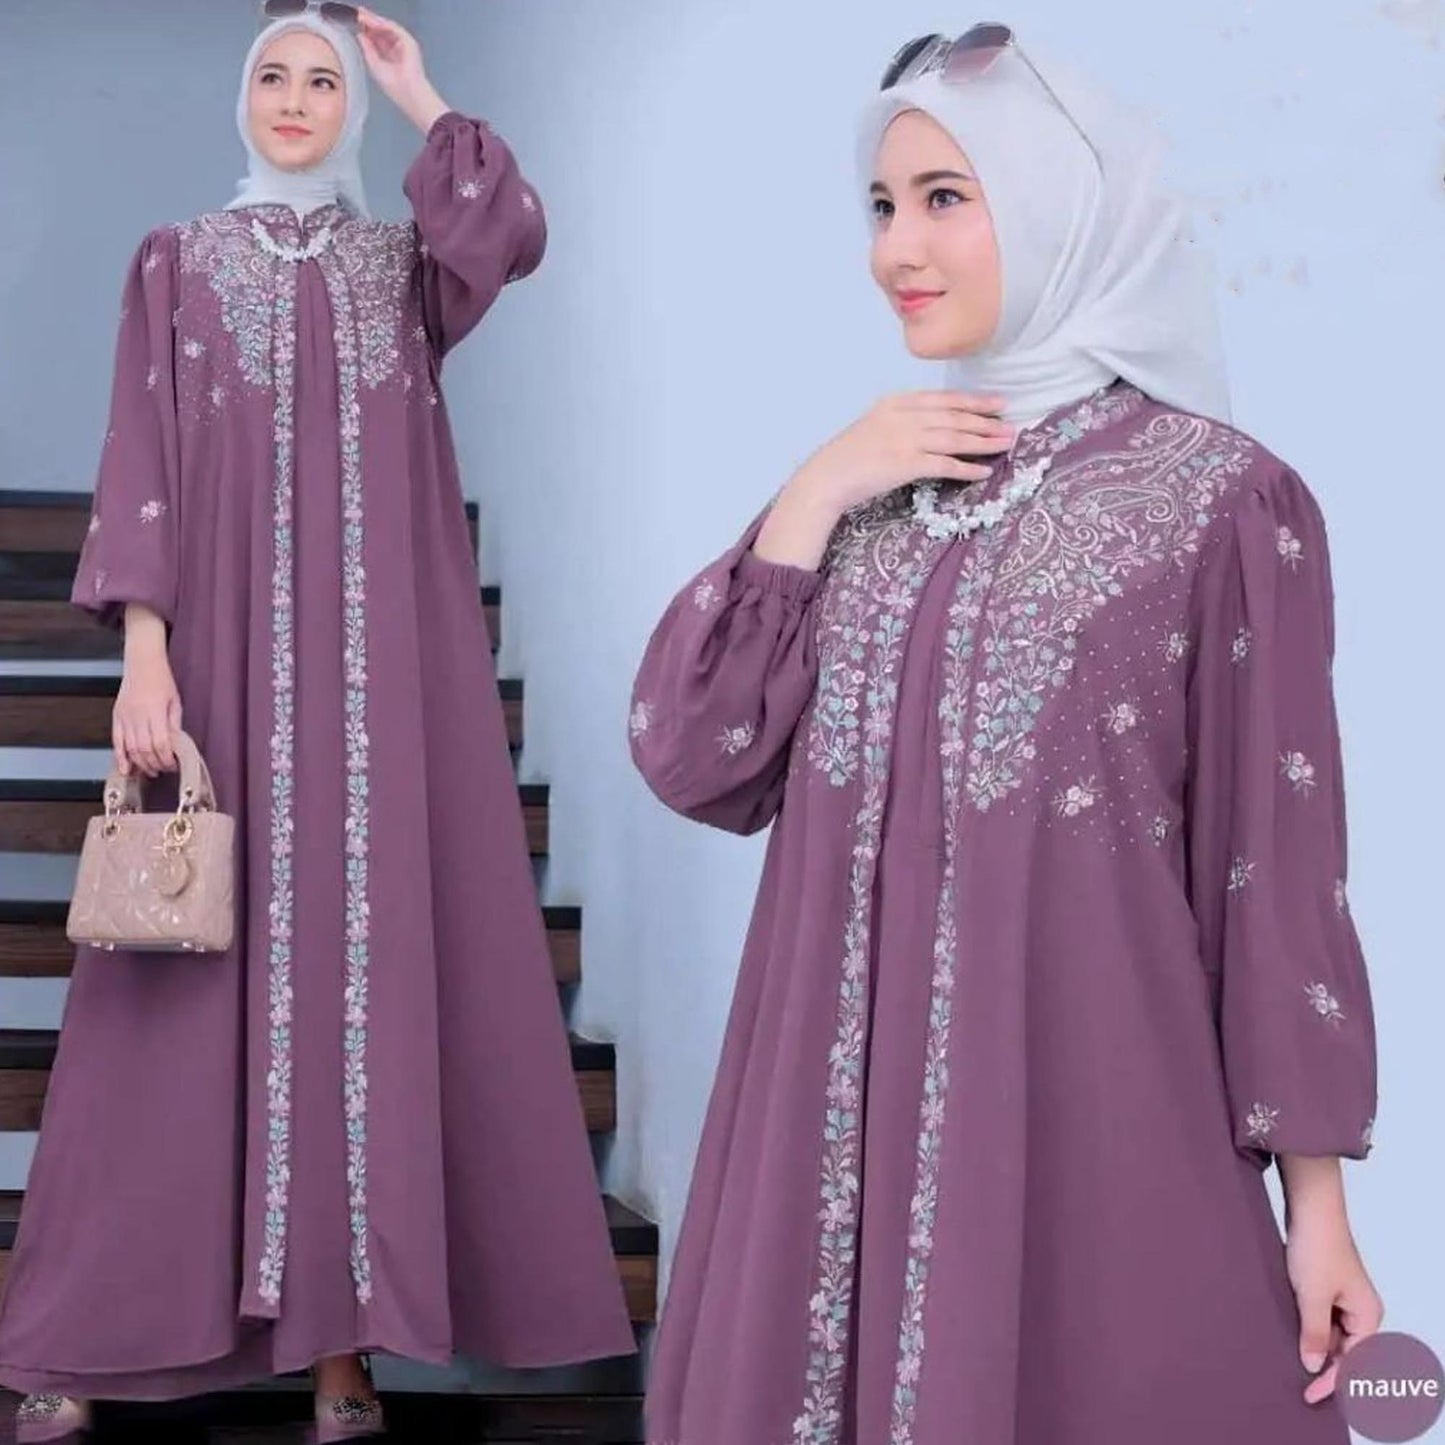 Women's Muslim Gamis - Look Stunning with a Touch of Elegant Embroidery, Muslimah fashion, Muslim Women, Women Dress, Gamis, Islamic Dress